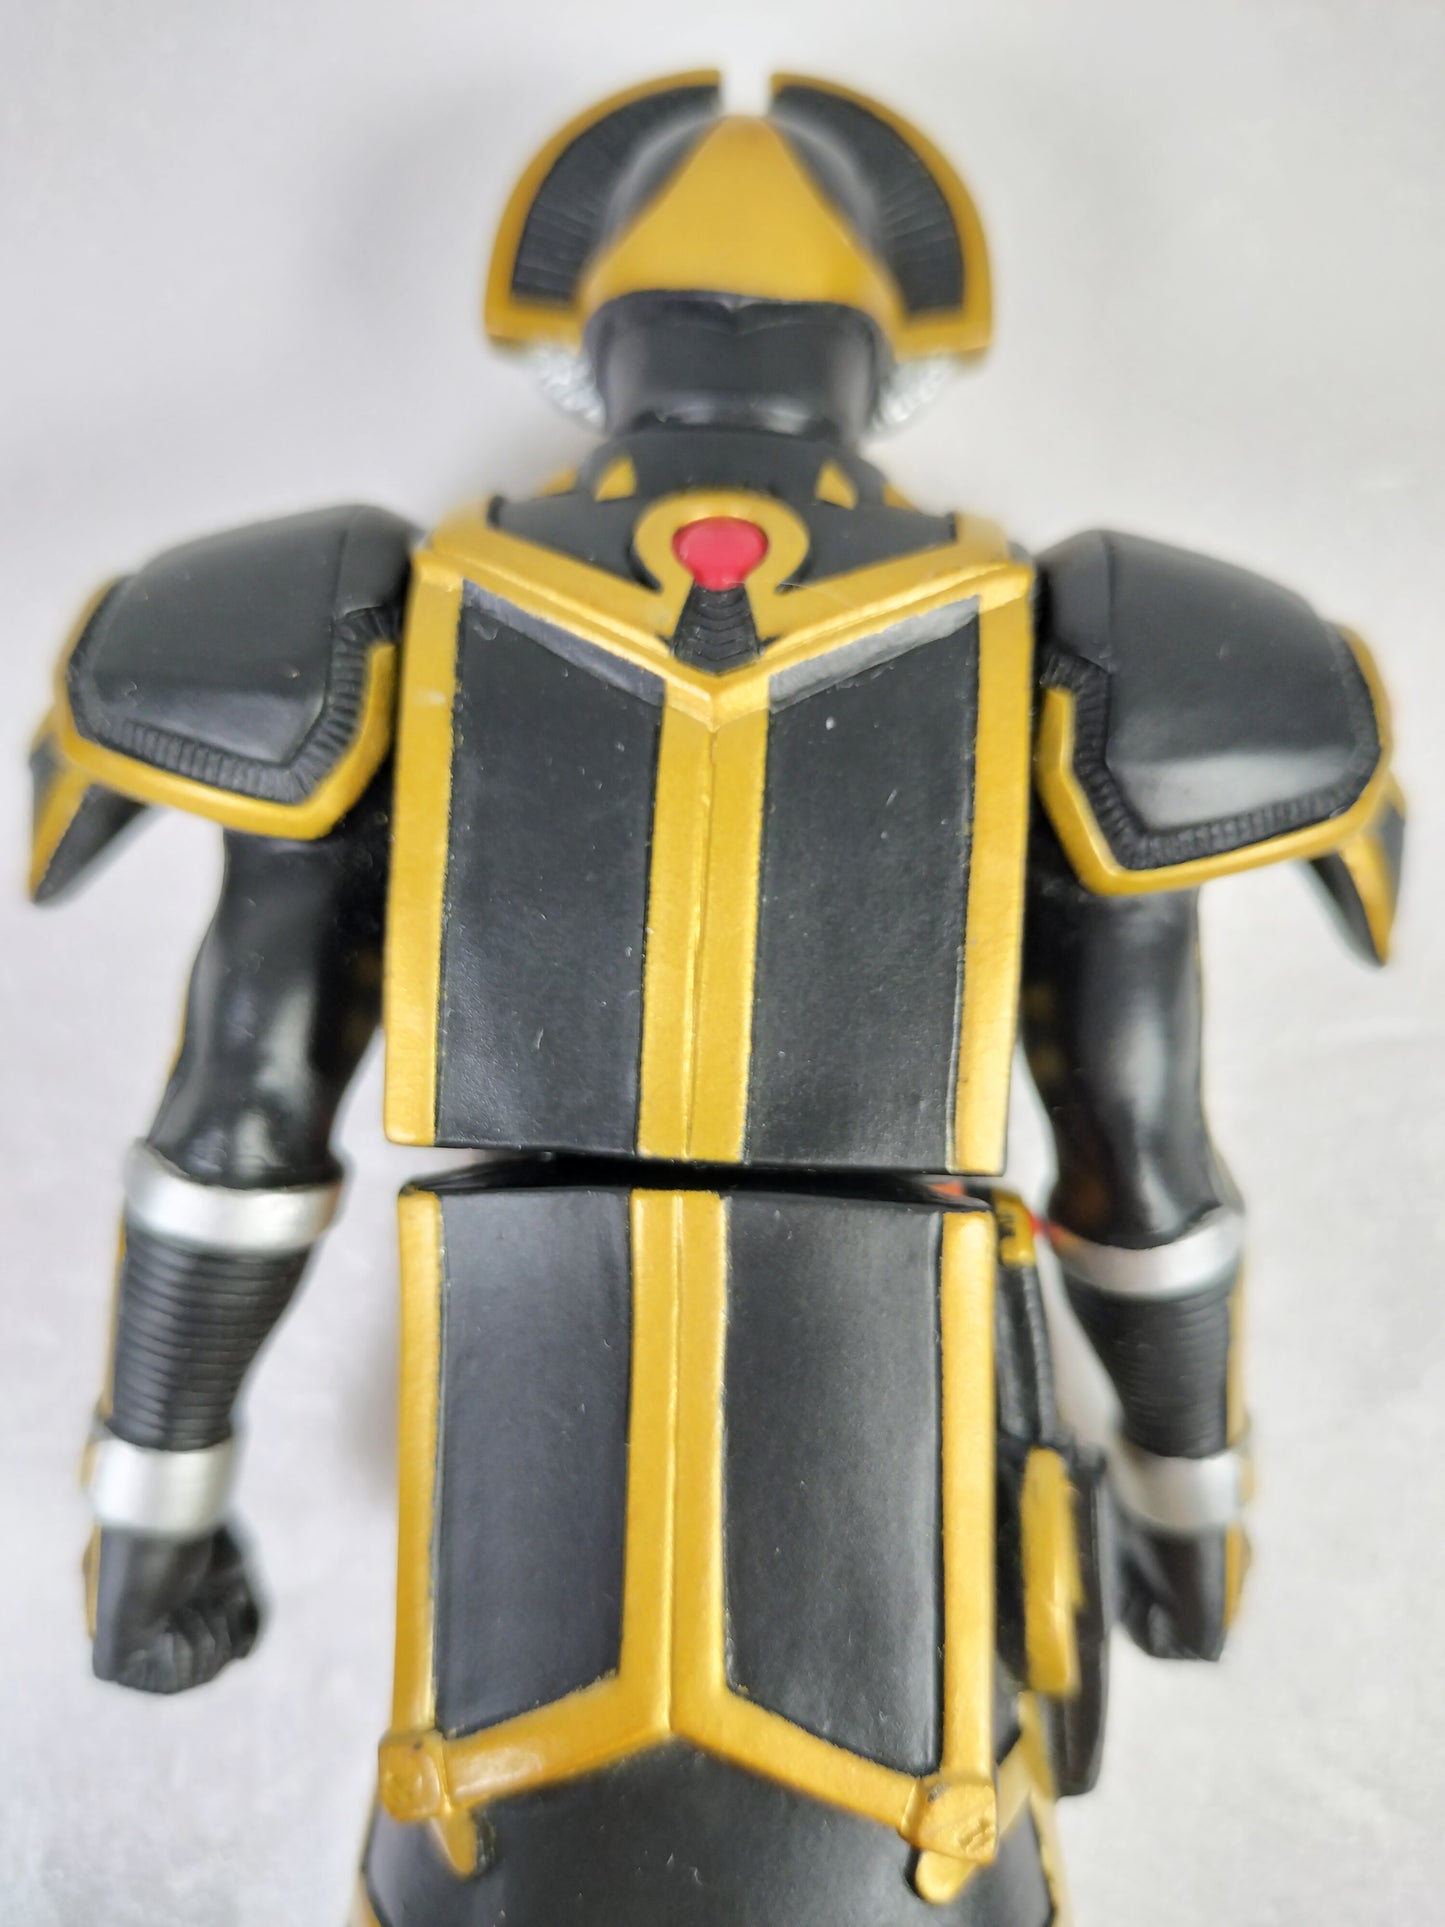 Kamen Rider Ogre Mask Rider Made in China Height about 17cm Manufactured in 2004 Sofvi Figure retro vintage major scratches and dirt